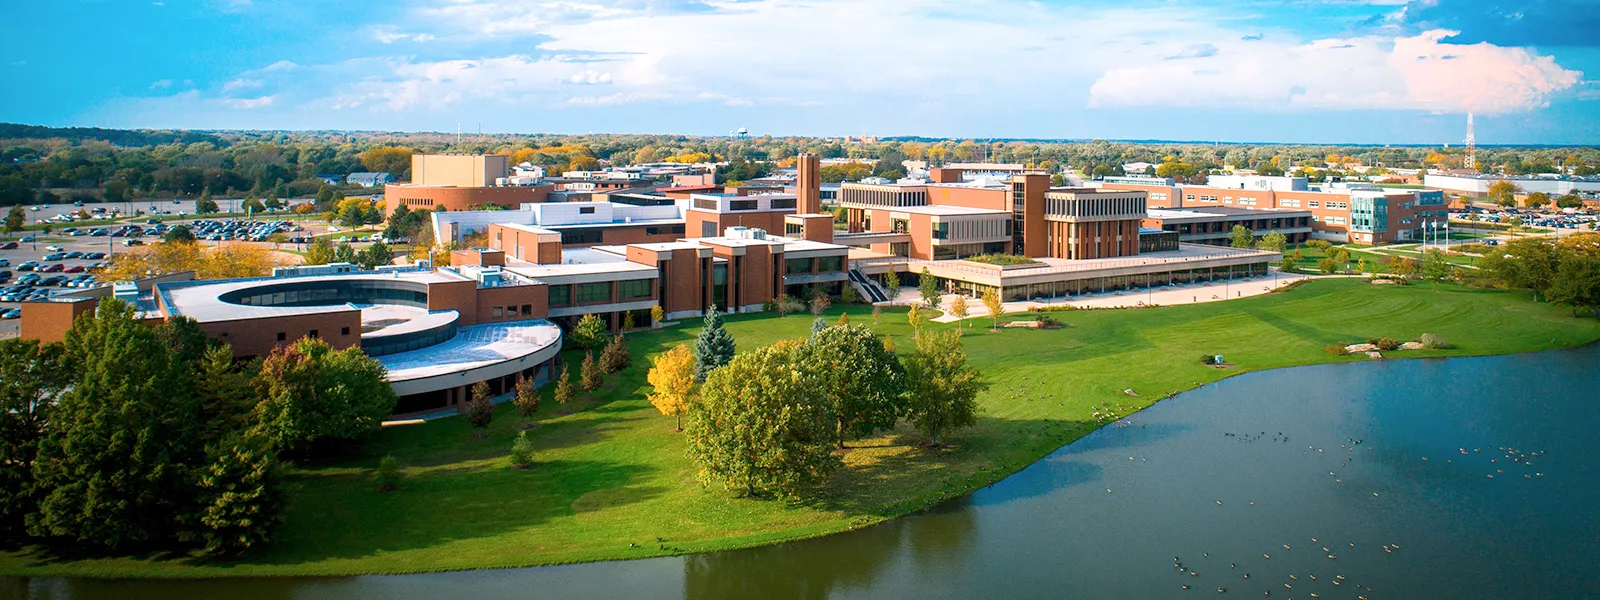 Spartan Drive campus aerial view in the Summer